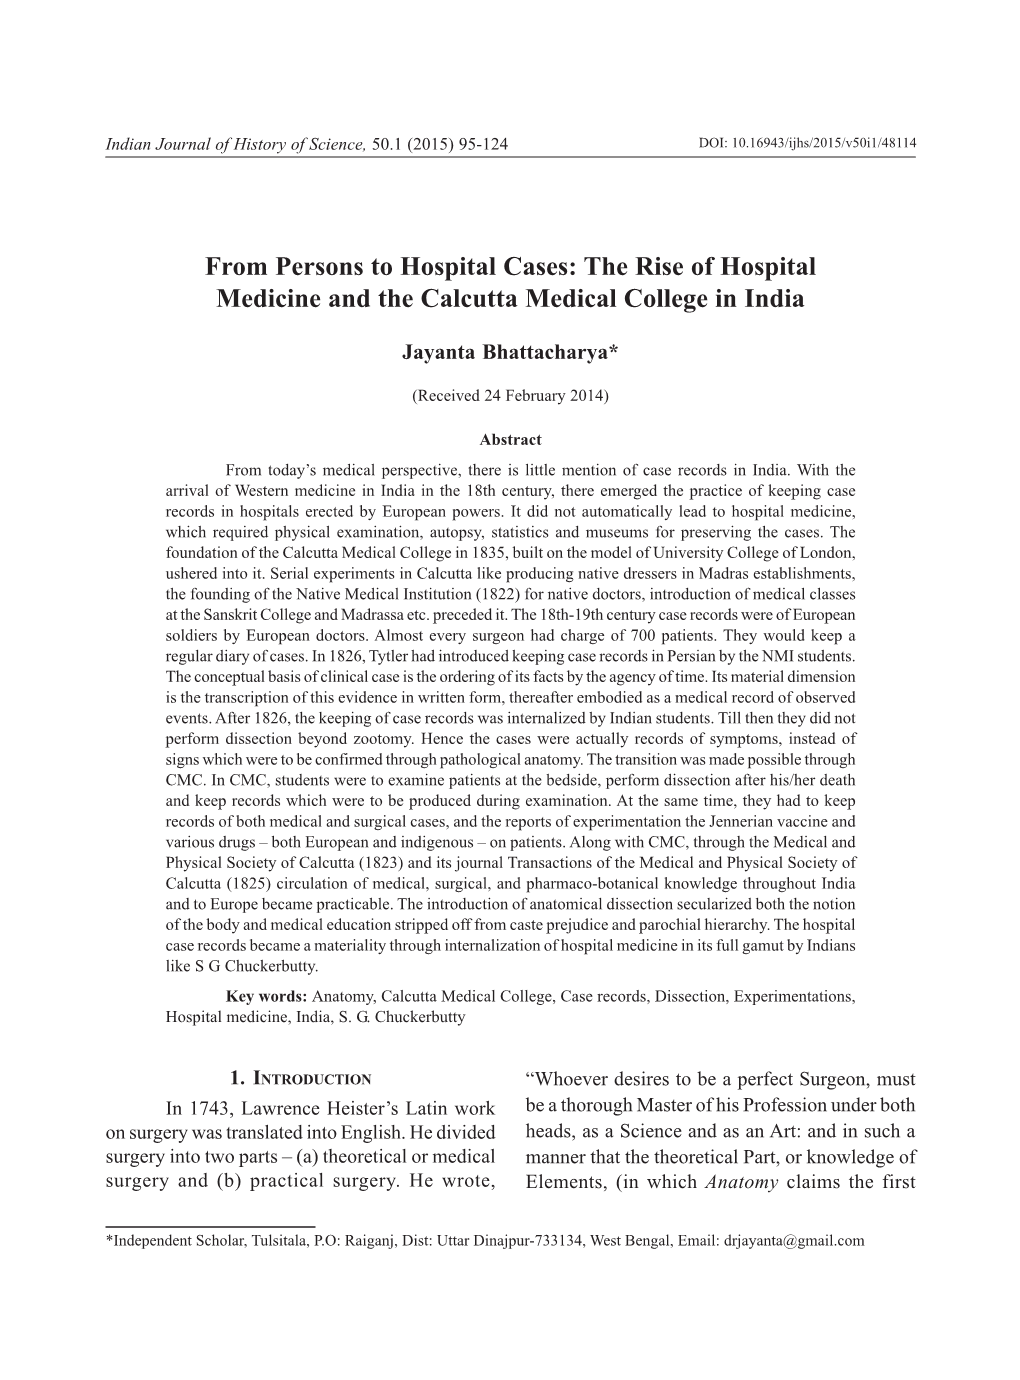 From Persons to Hospital Cases: the Rise of Hospital Medicine and the Calcutta Medical College in India